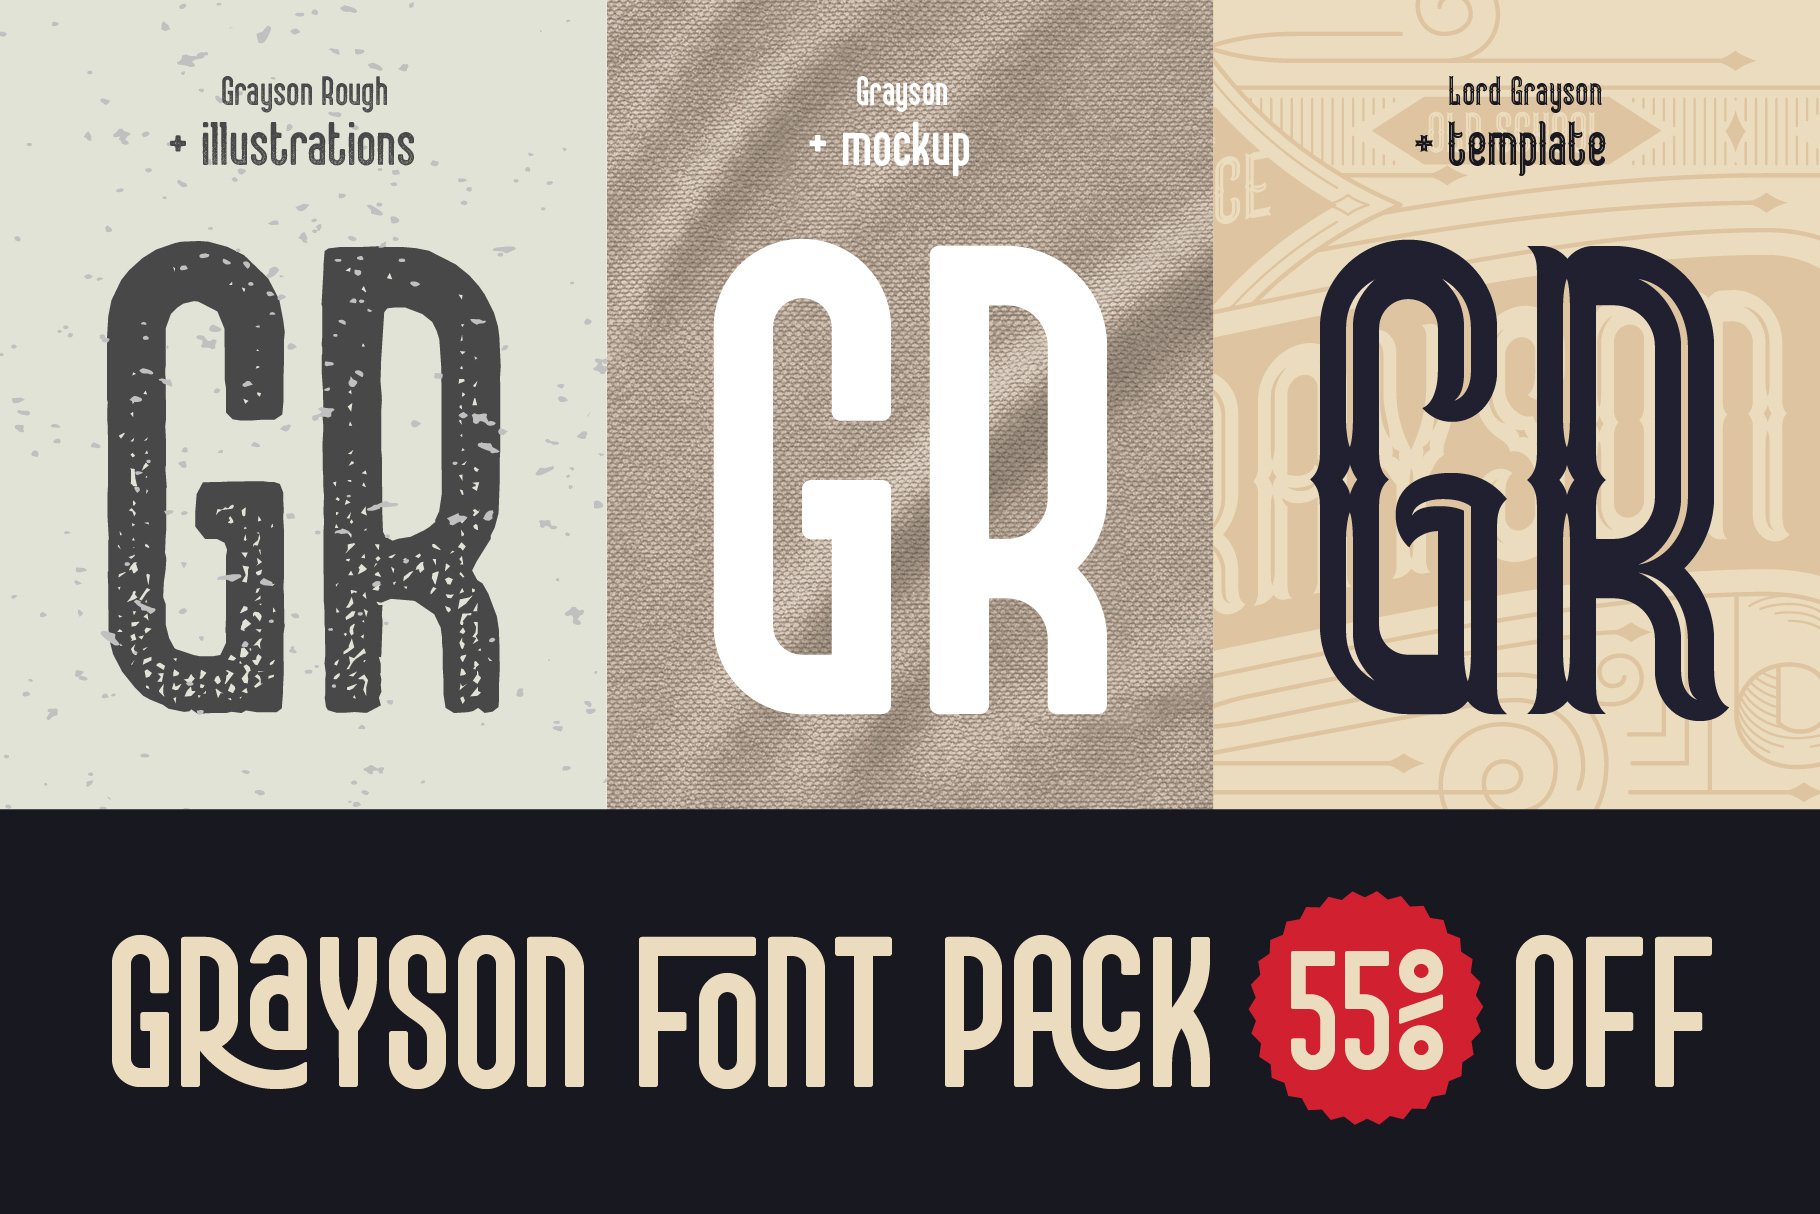 Grayson Font Pack. 55% OFF! cover image.